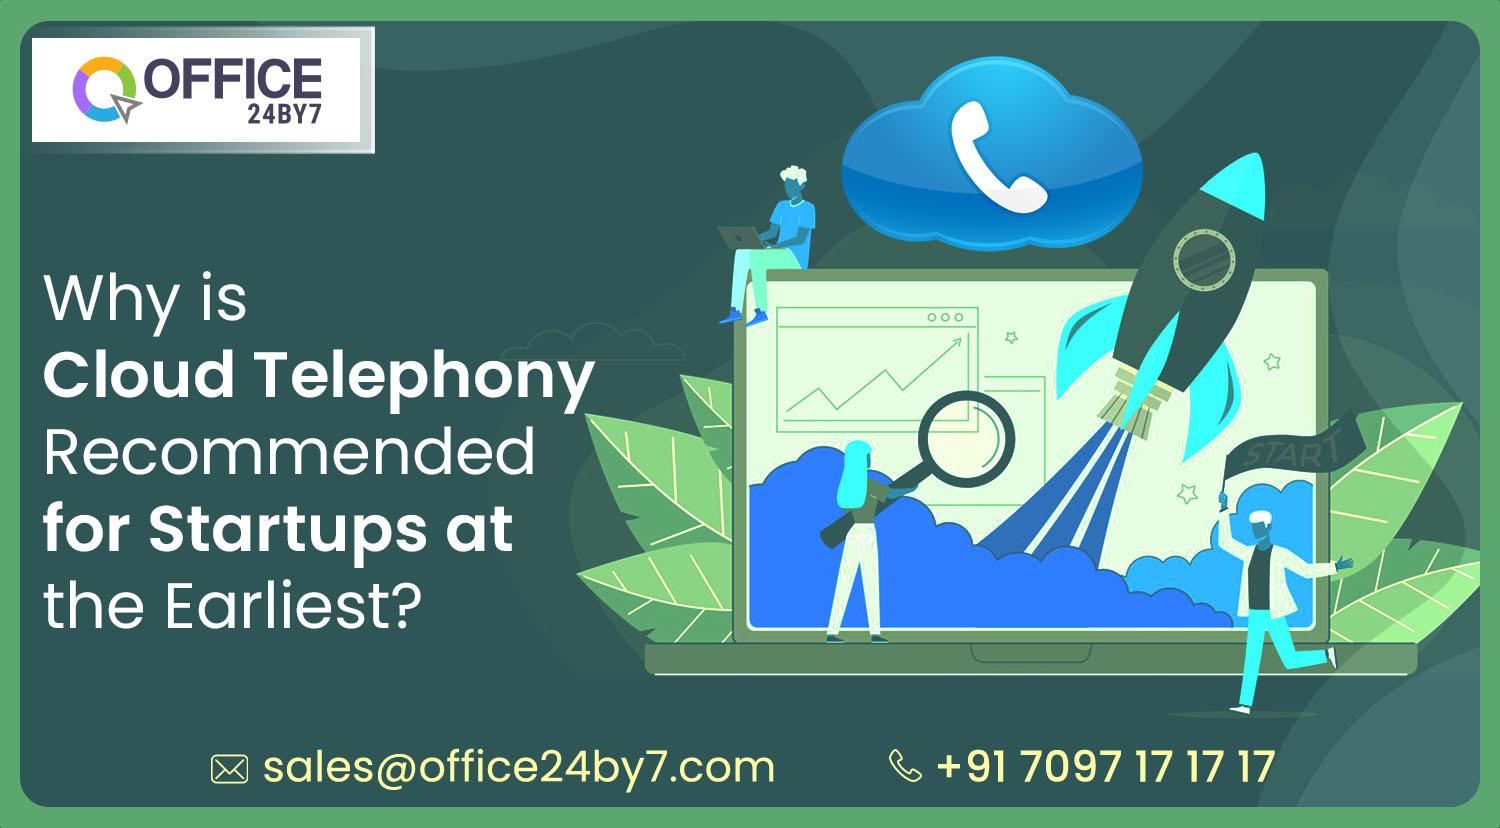 Startups should use cloud telephony as soon as possible. Startup enterprises in India have seen substantial growth over the previous few years. In addition to allowing for a remote work environment, cloud telephony solutions have a lot to offer. It promotes client loyalty and trust.